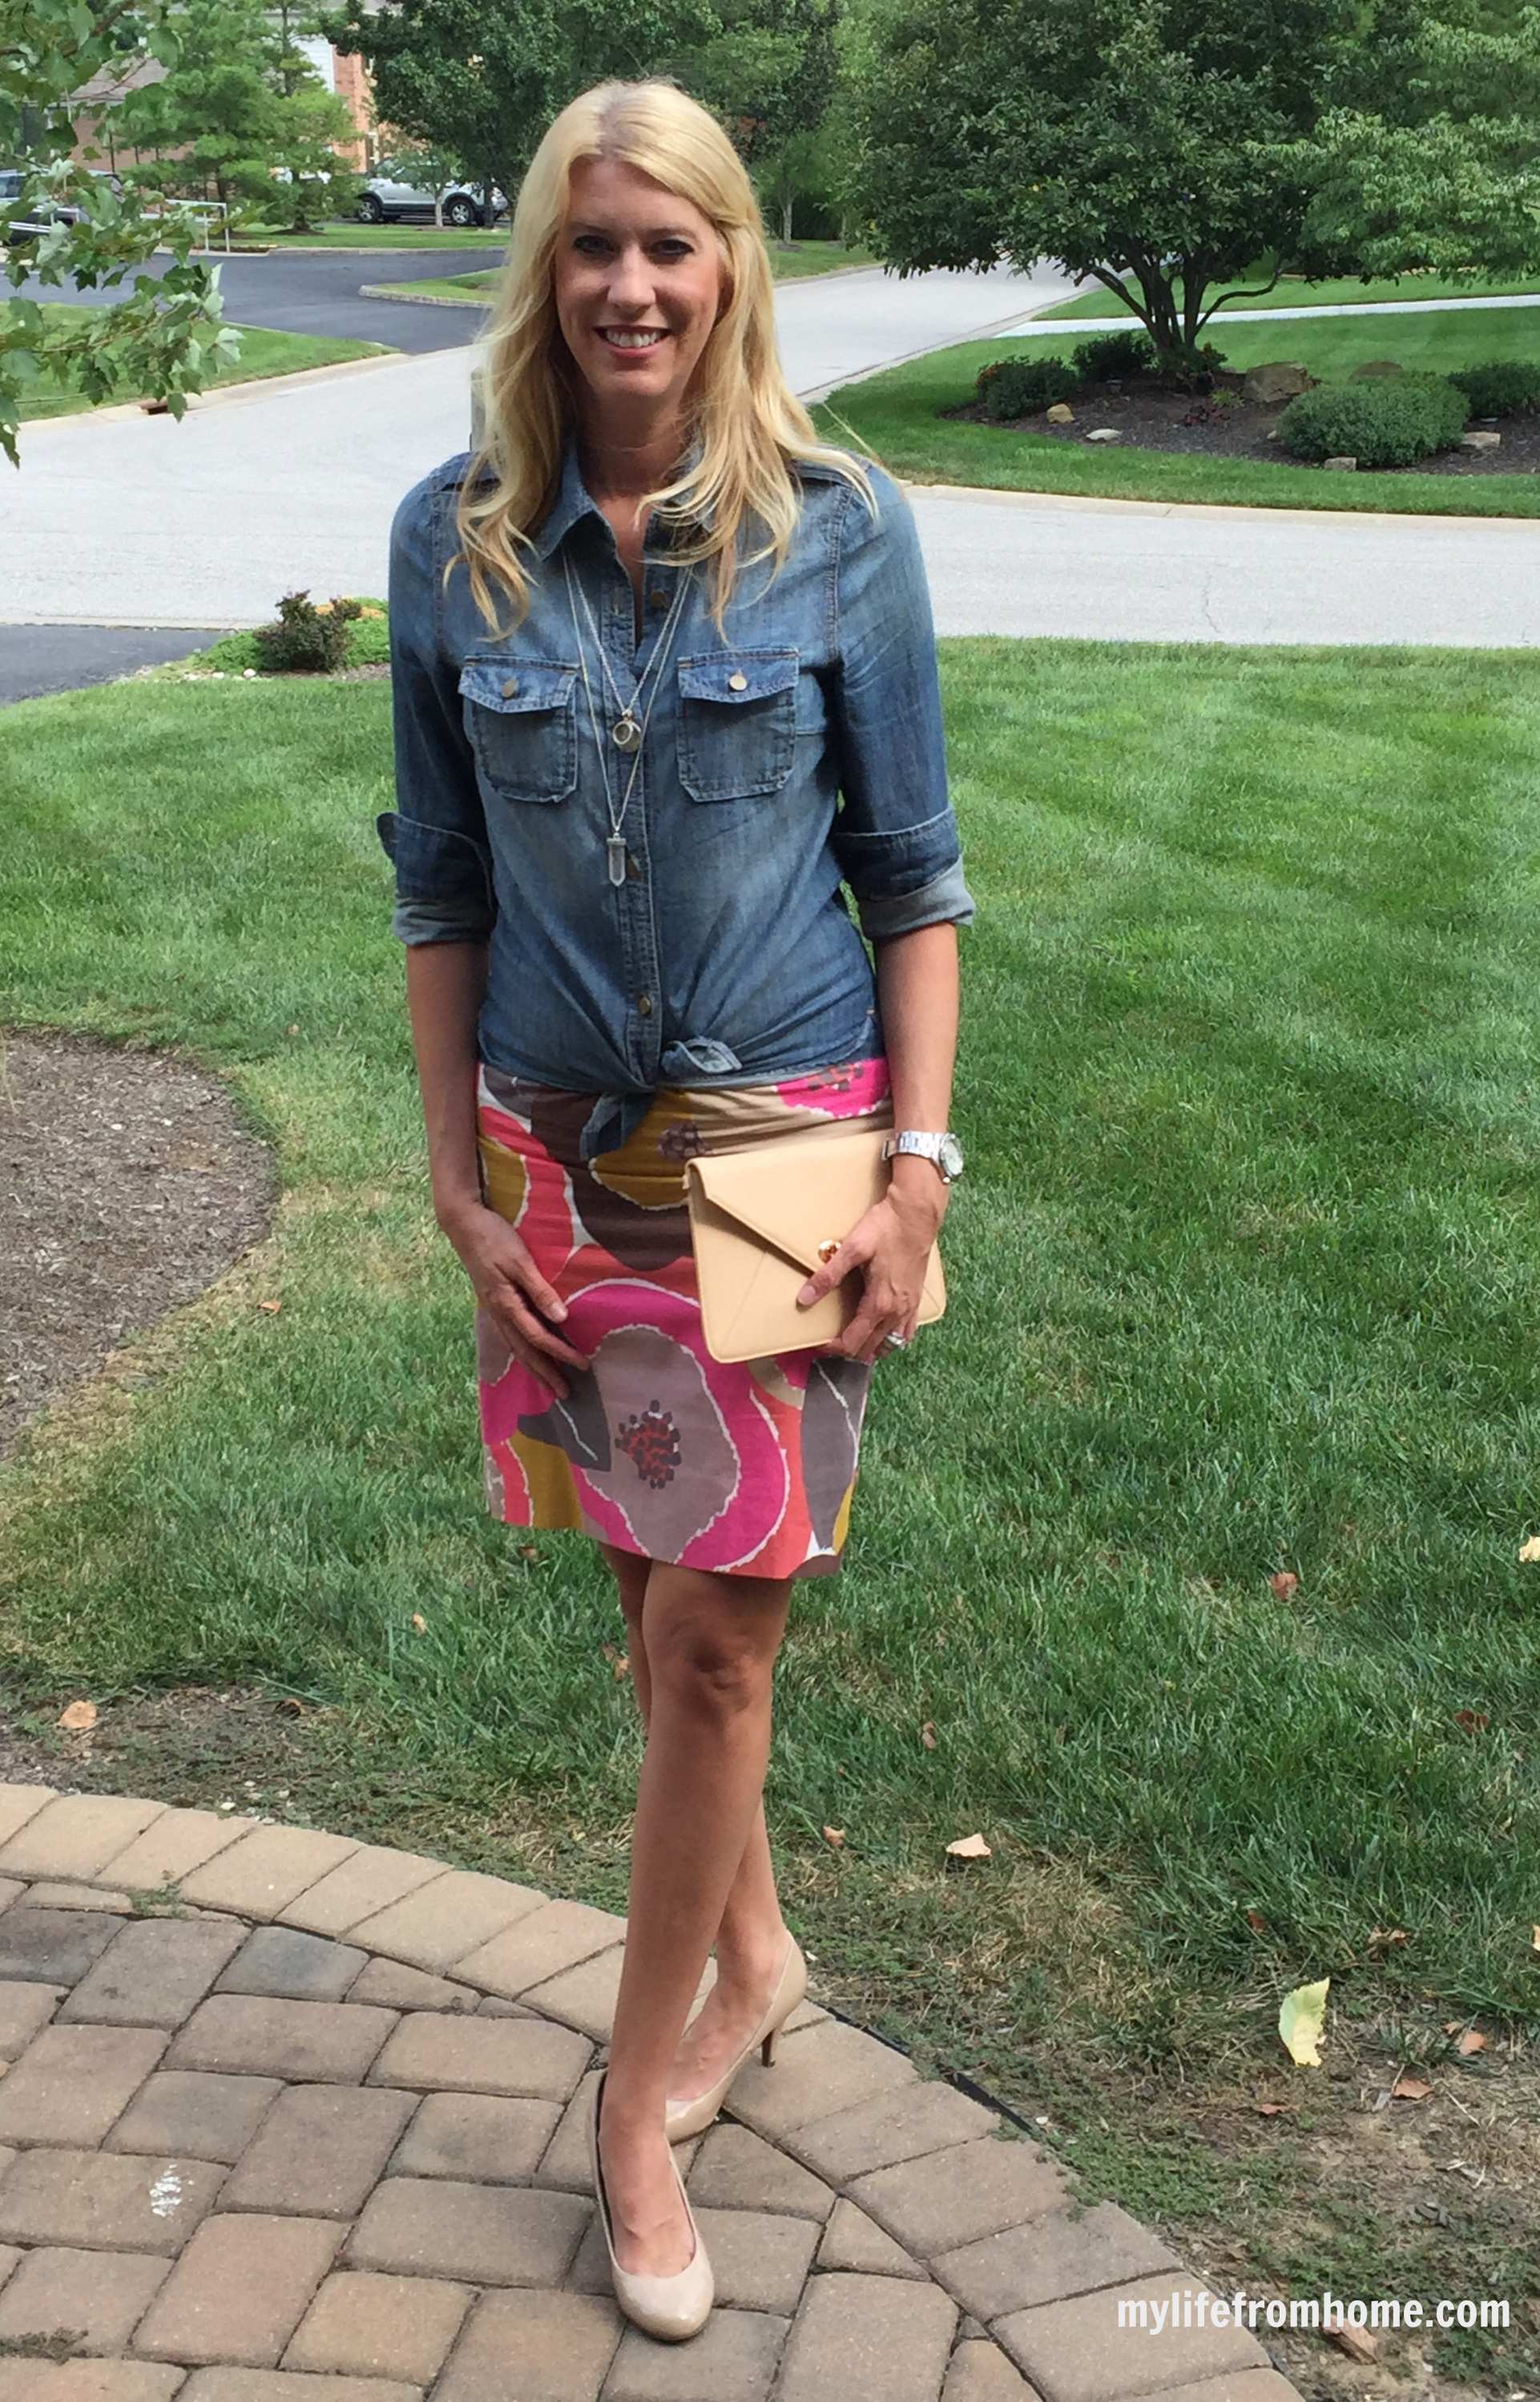 Denim Shirt Paired With a Skirt by www.whitecottagehomeandliving.com